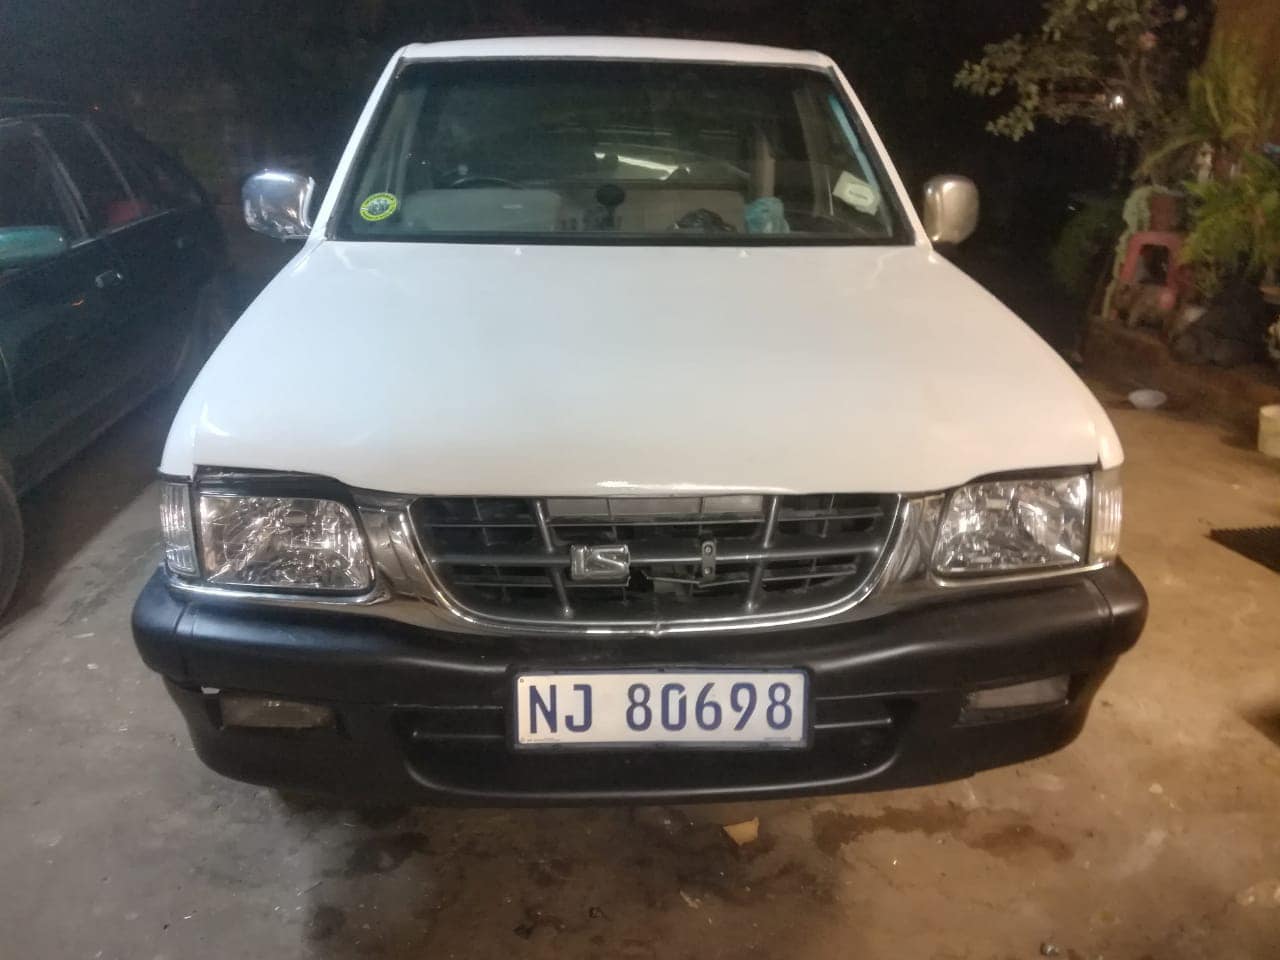 Theft of vehicle in Trenance Park